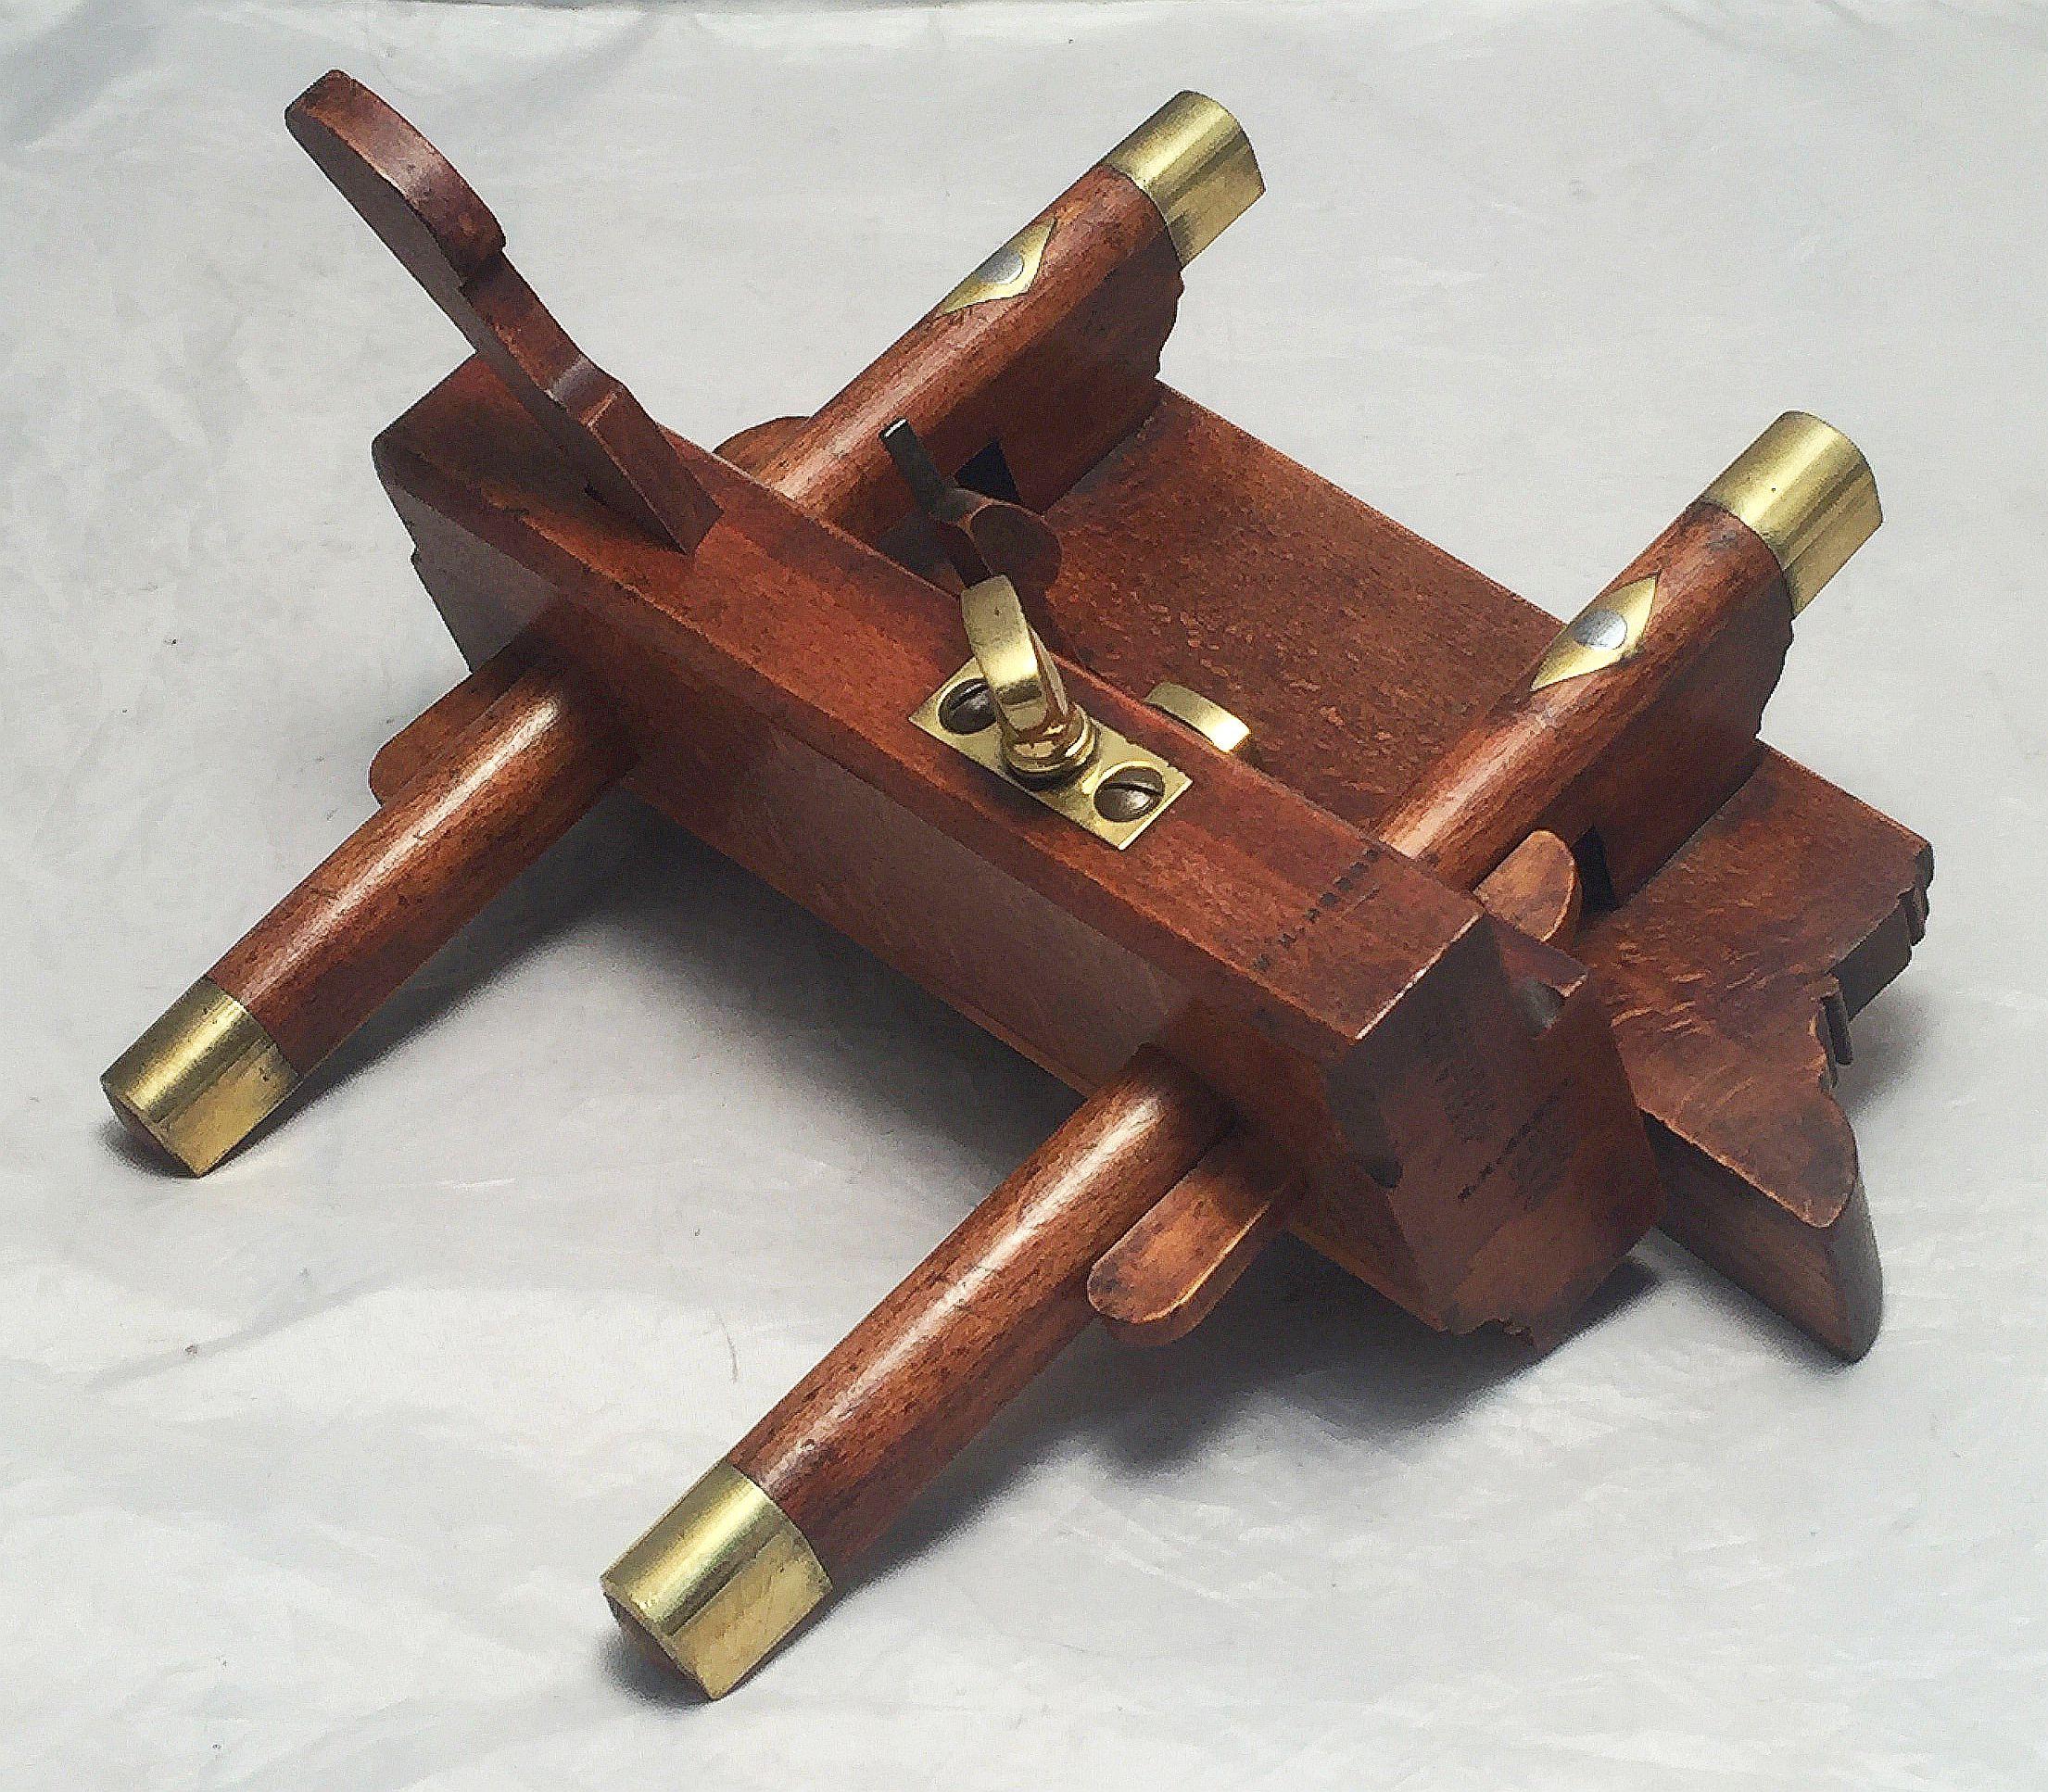 A fine English shipwright's or carpenter's sash fillister or plough plane, c.1900, of finely patinated beech wood and brass by Atkin and Sons, Sheffield Works, Birmingham
Marked A & S, Benefactum

The British wooden sash fillister plane is a